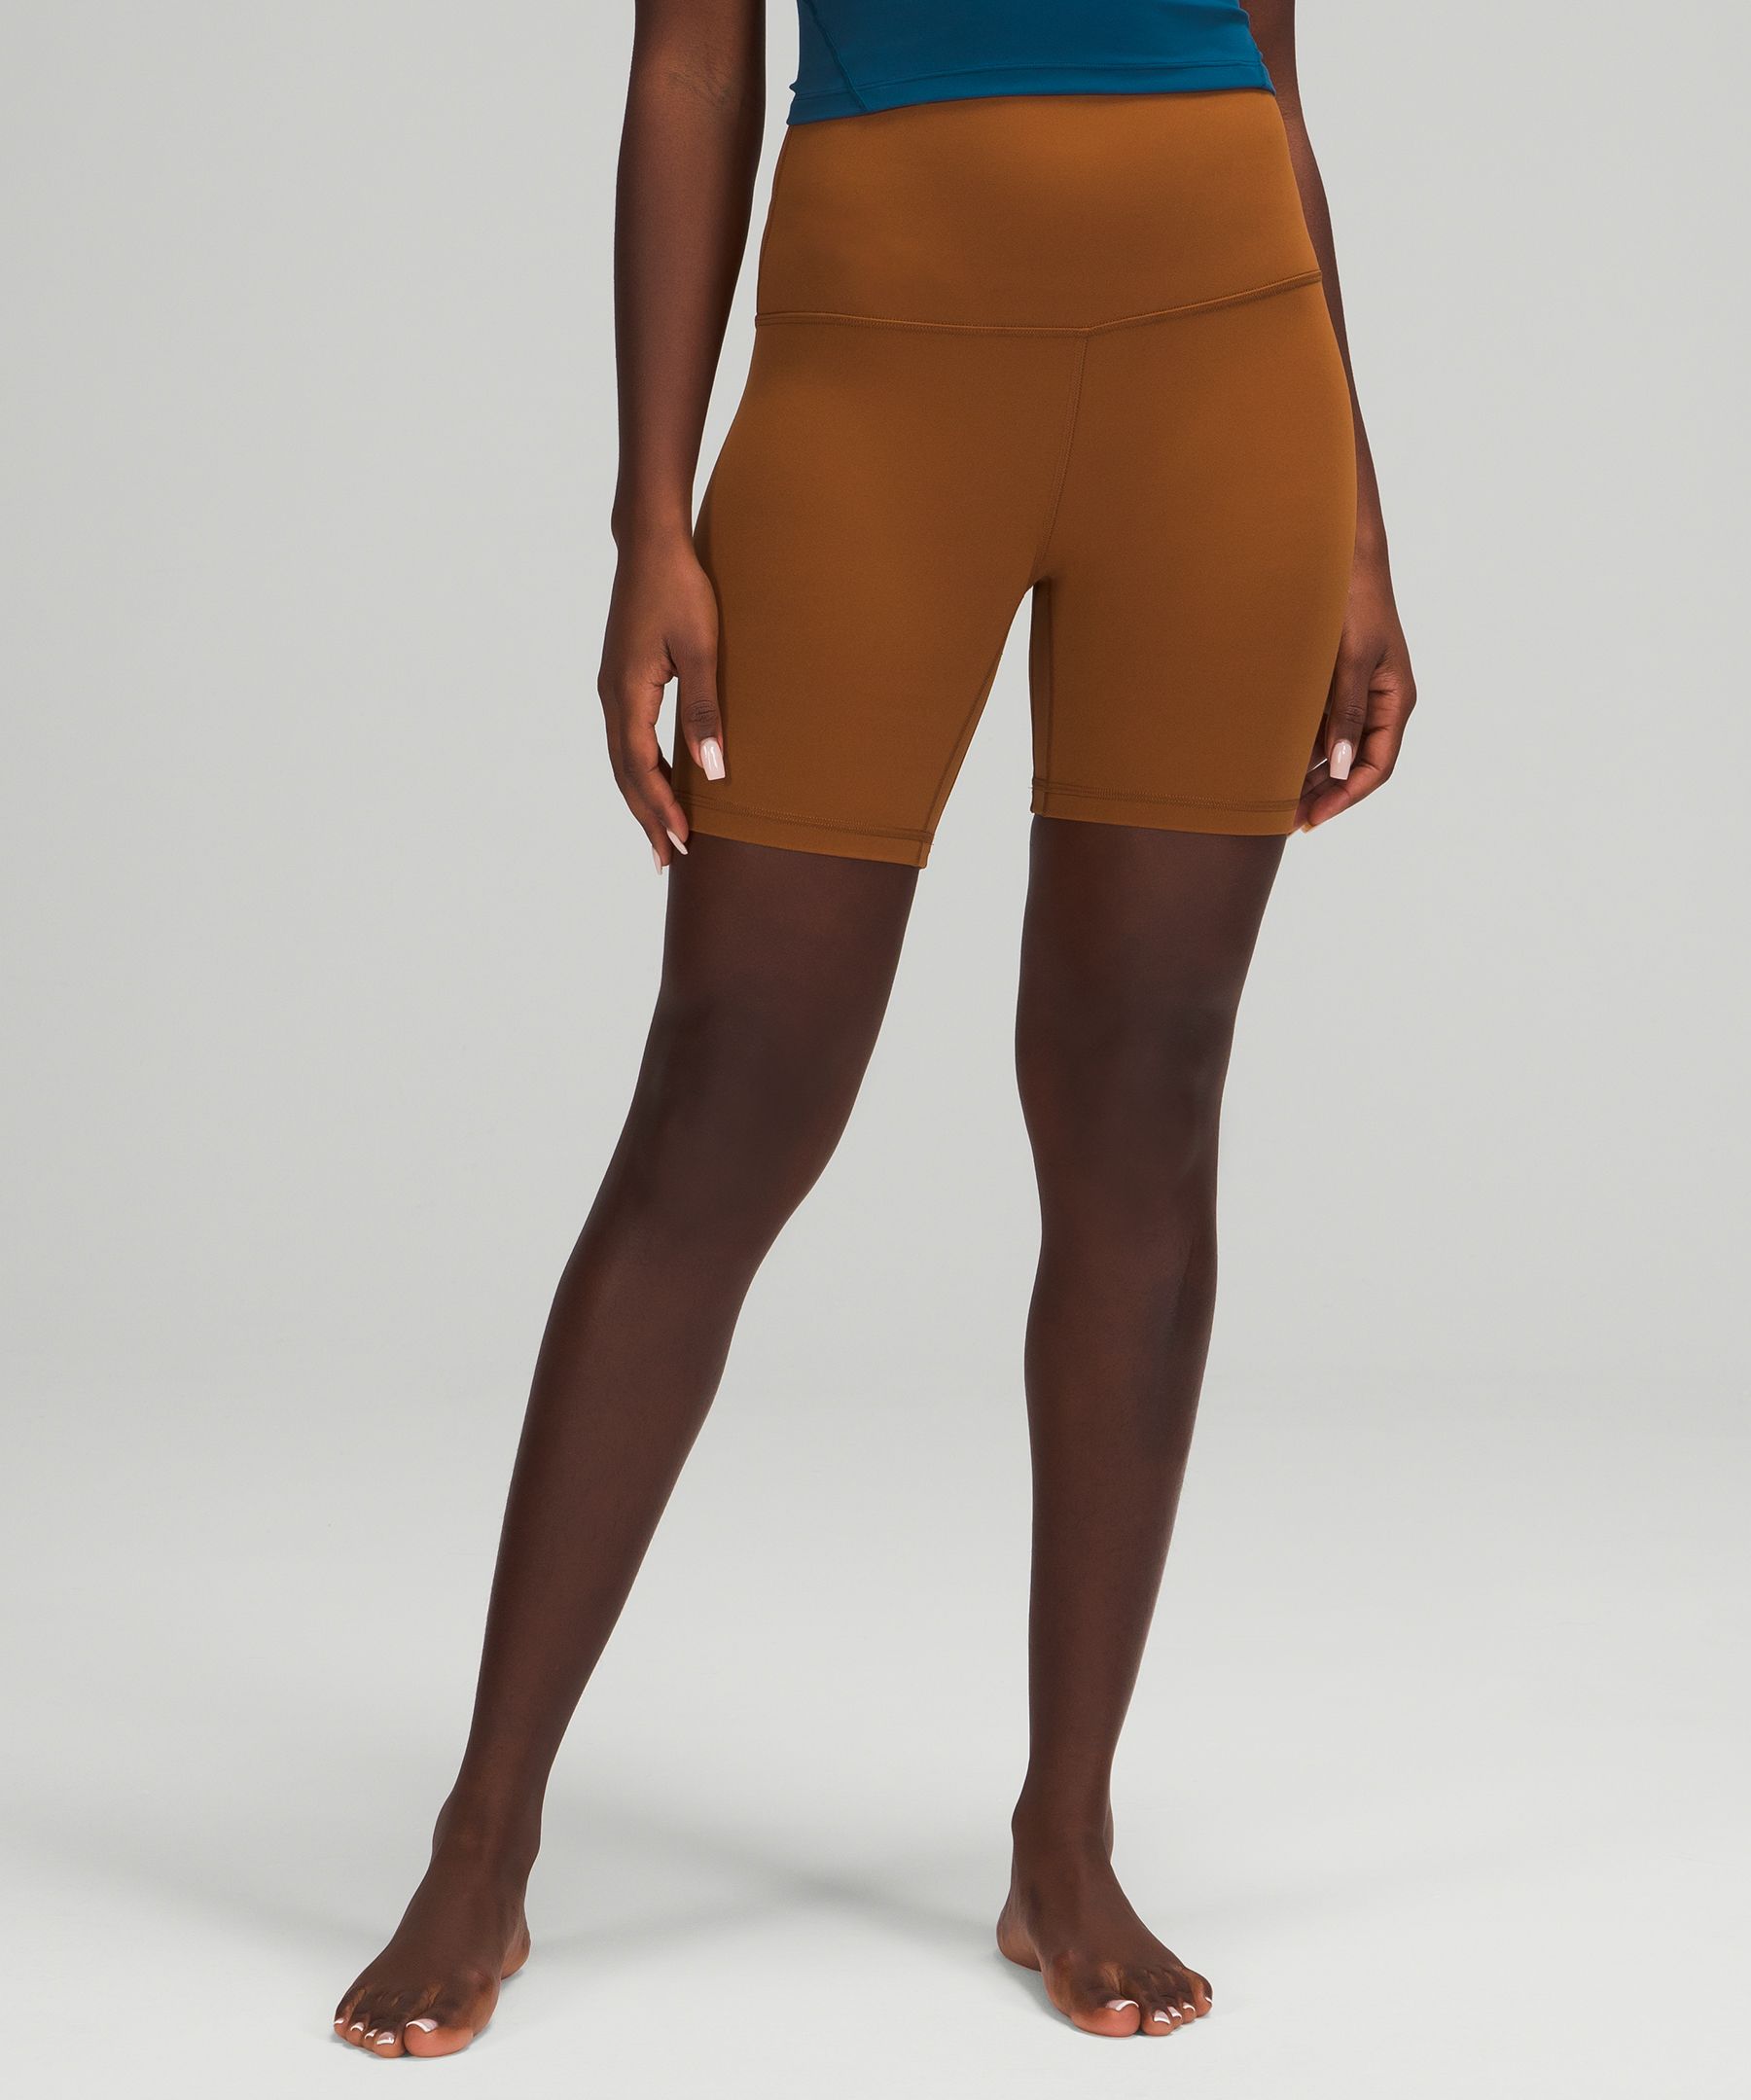 Lululemon Align™ High-rise Shorts 6" In Copper Brown